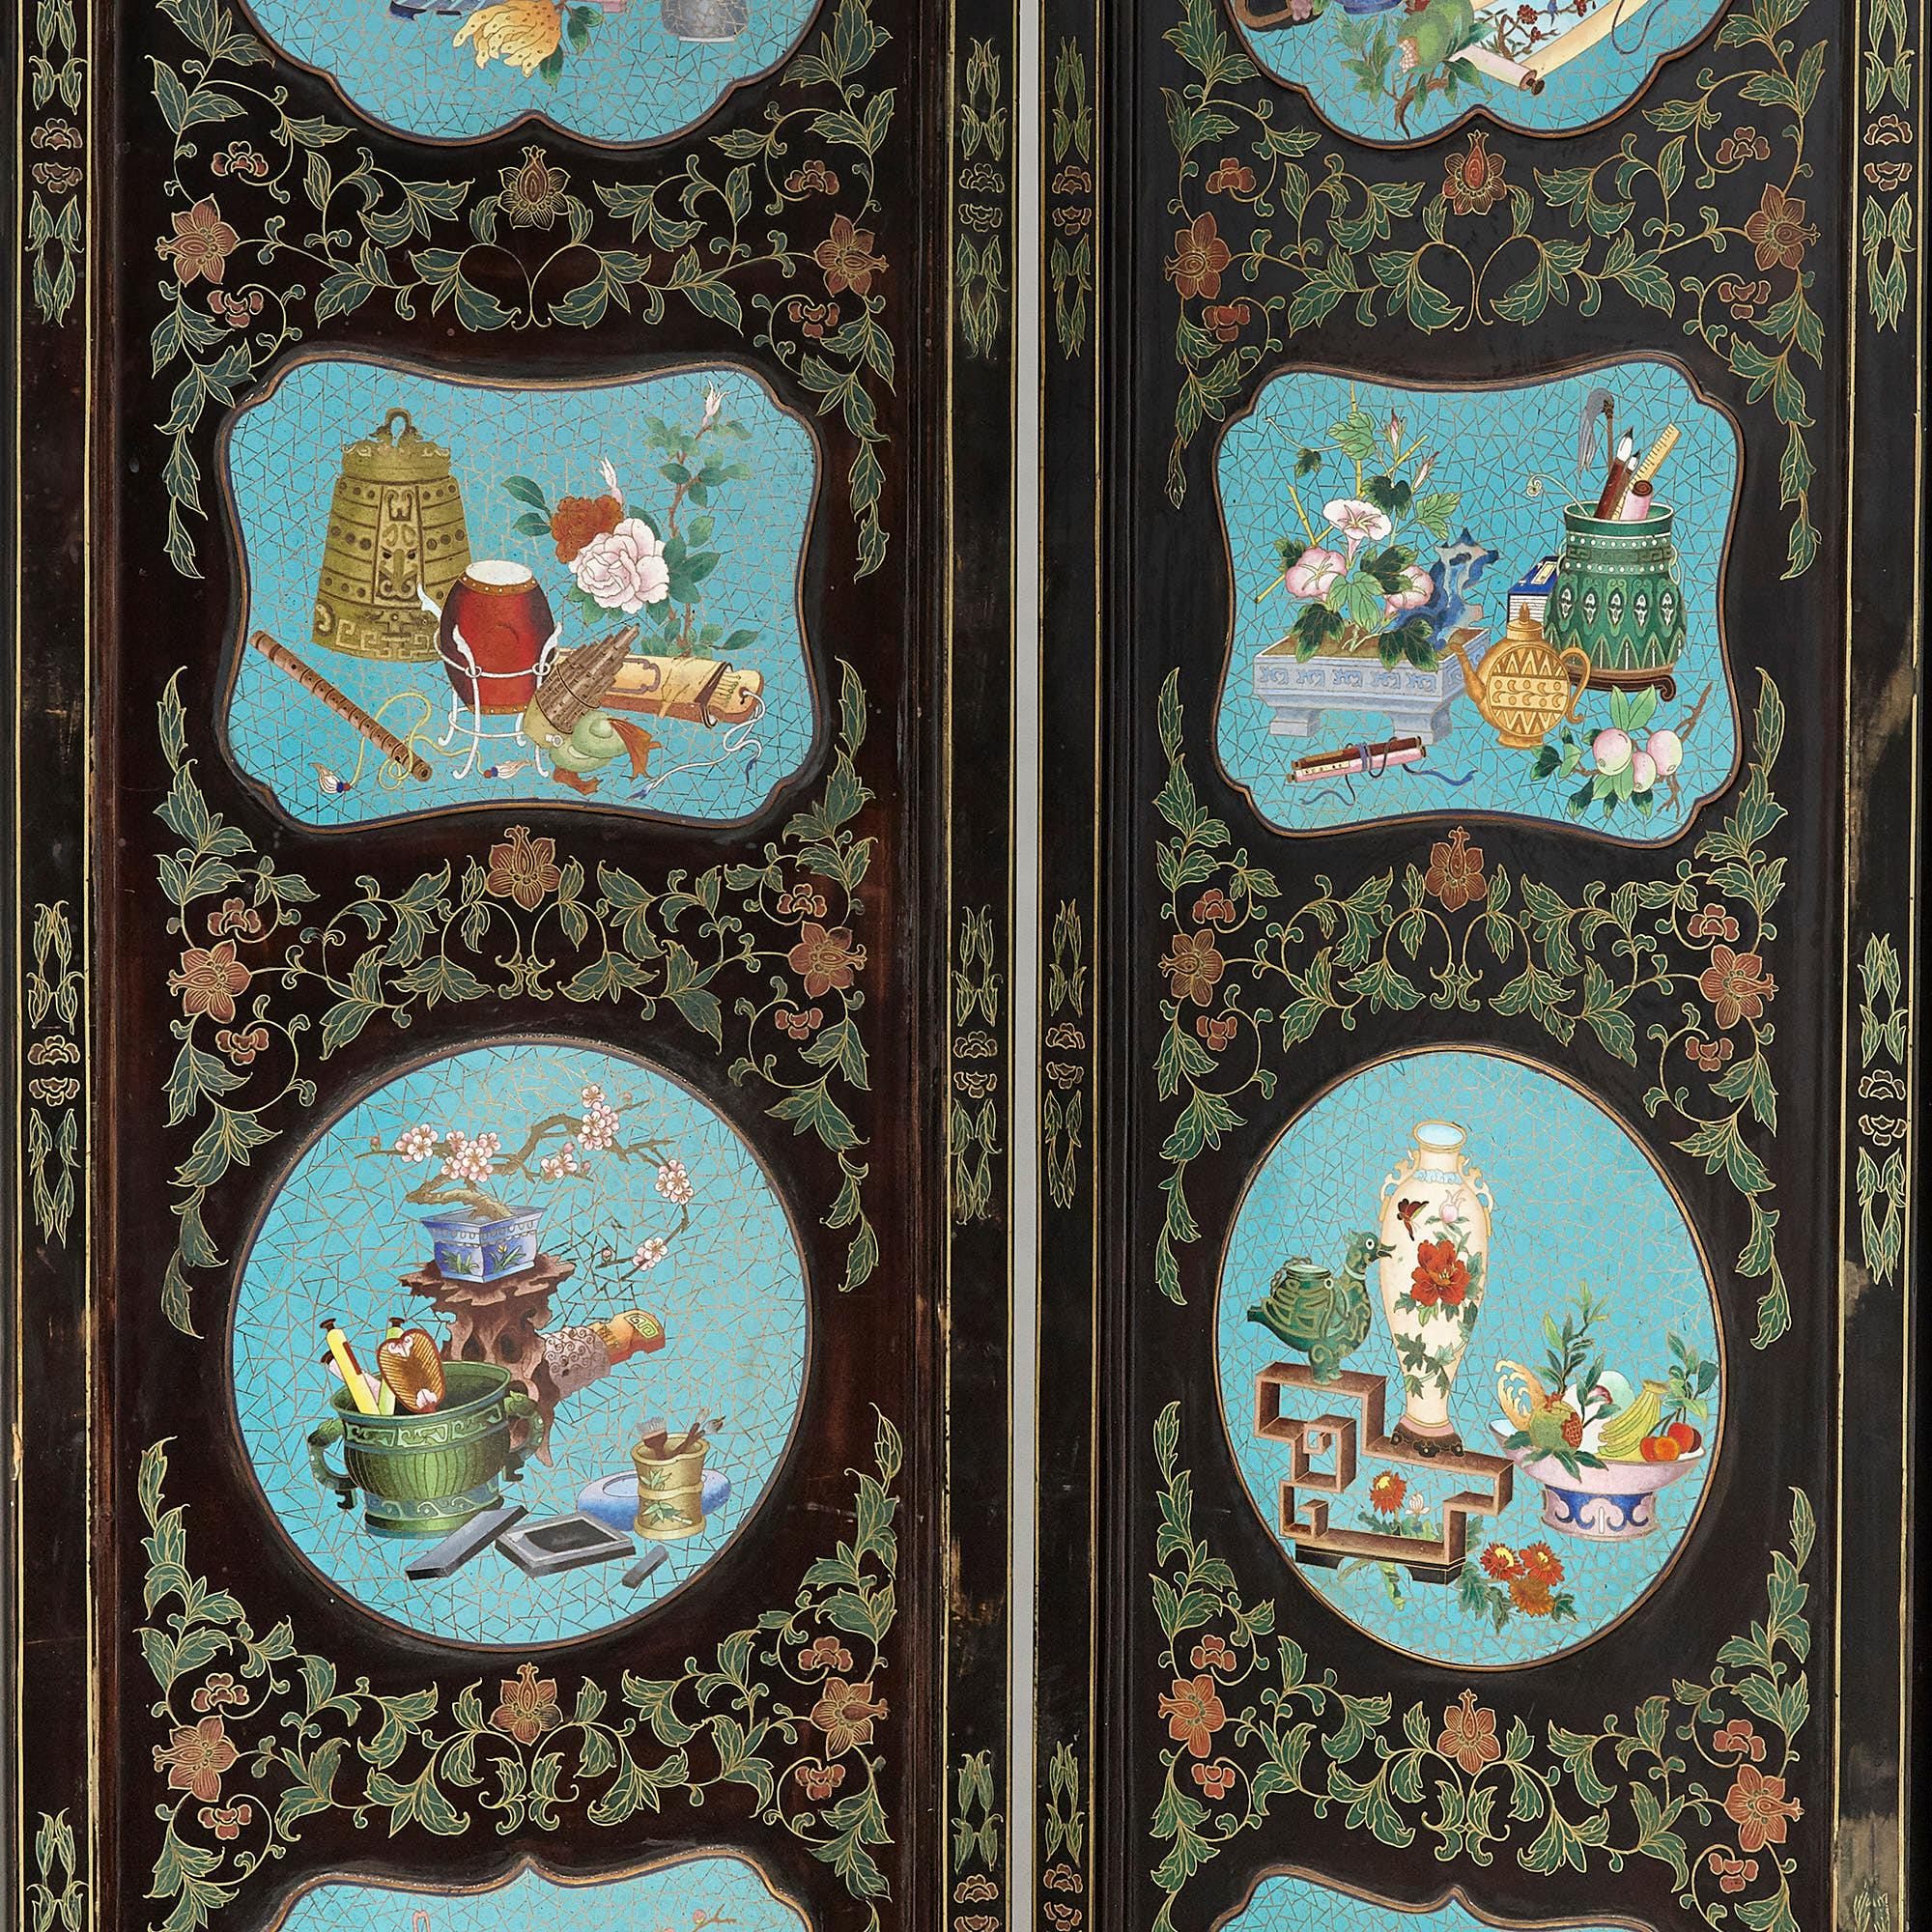 Chinese folding screen mounted with cloisonné enamel panels
Chinese, early 20th Century
Opened: Height 185cm, width 264cm, depth 3cm
Closed: Height 185cm, width 44cm, depth 18cm

This fine Chinese folding screen is crafted from lacquered wood